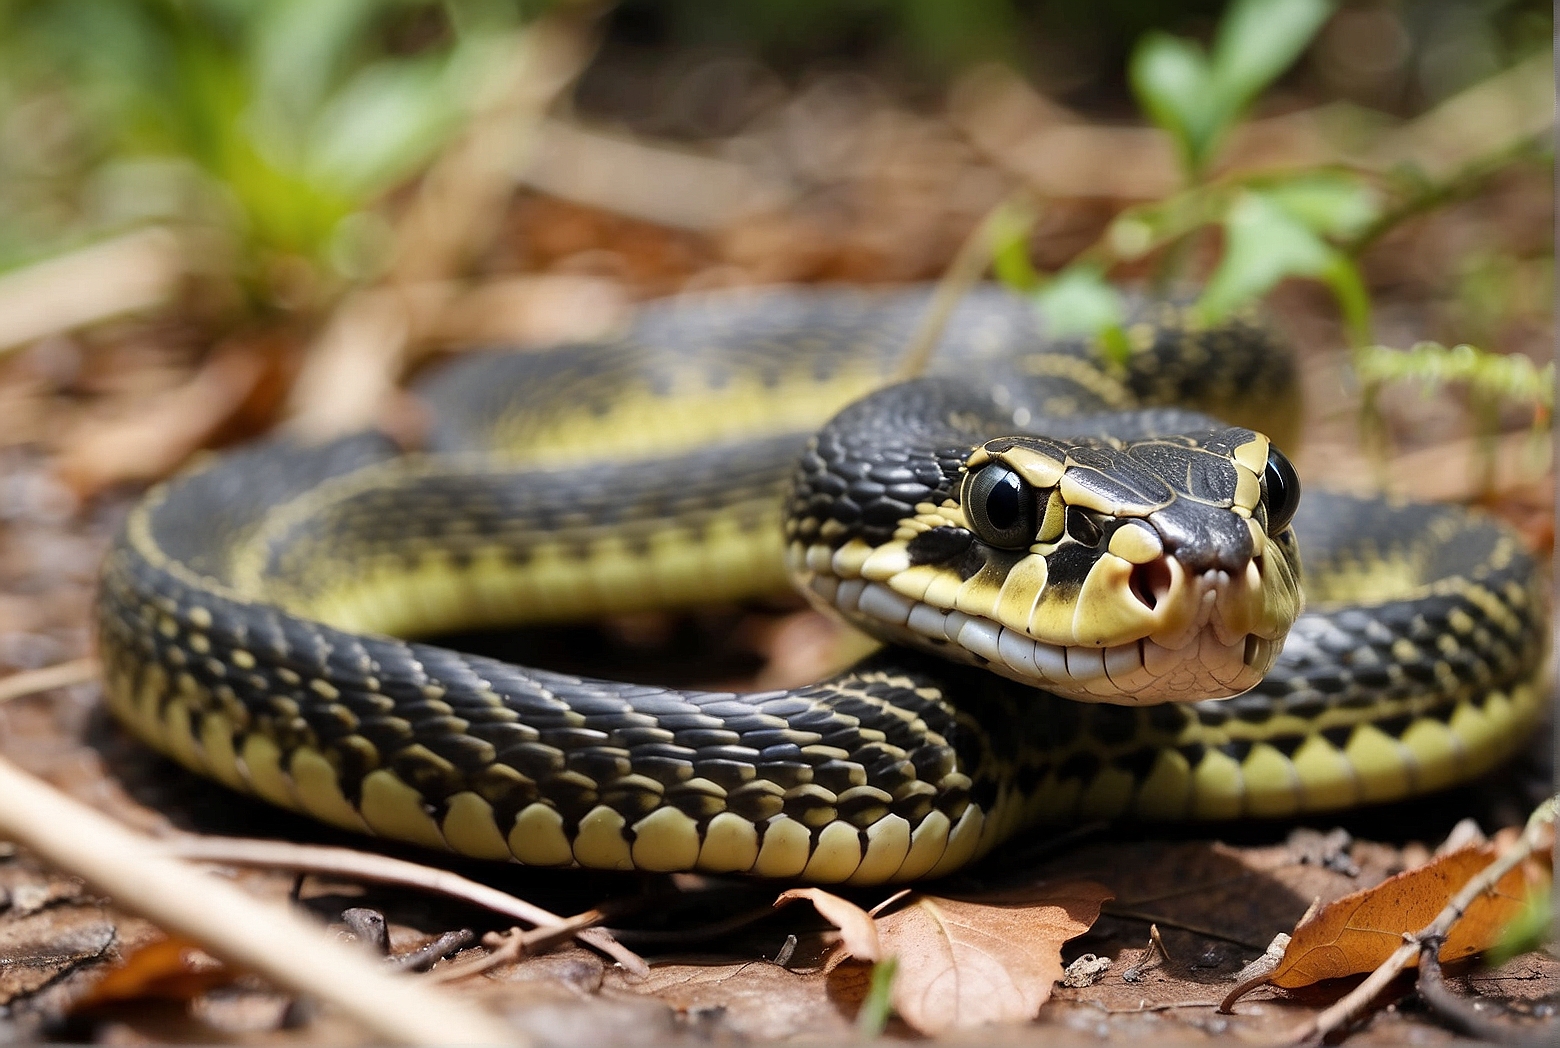 Are Garter Snakes Aggressive?